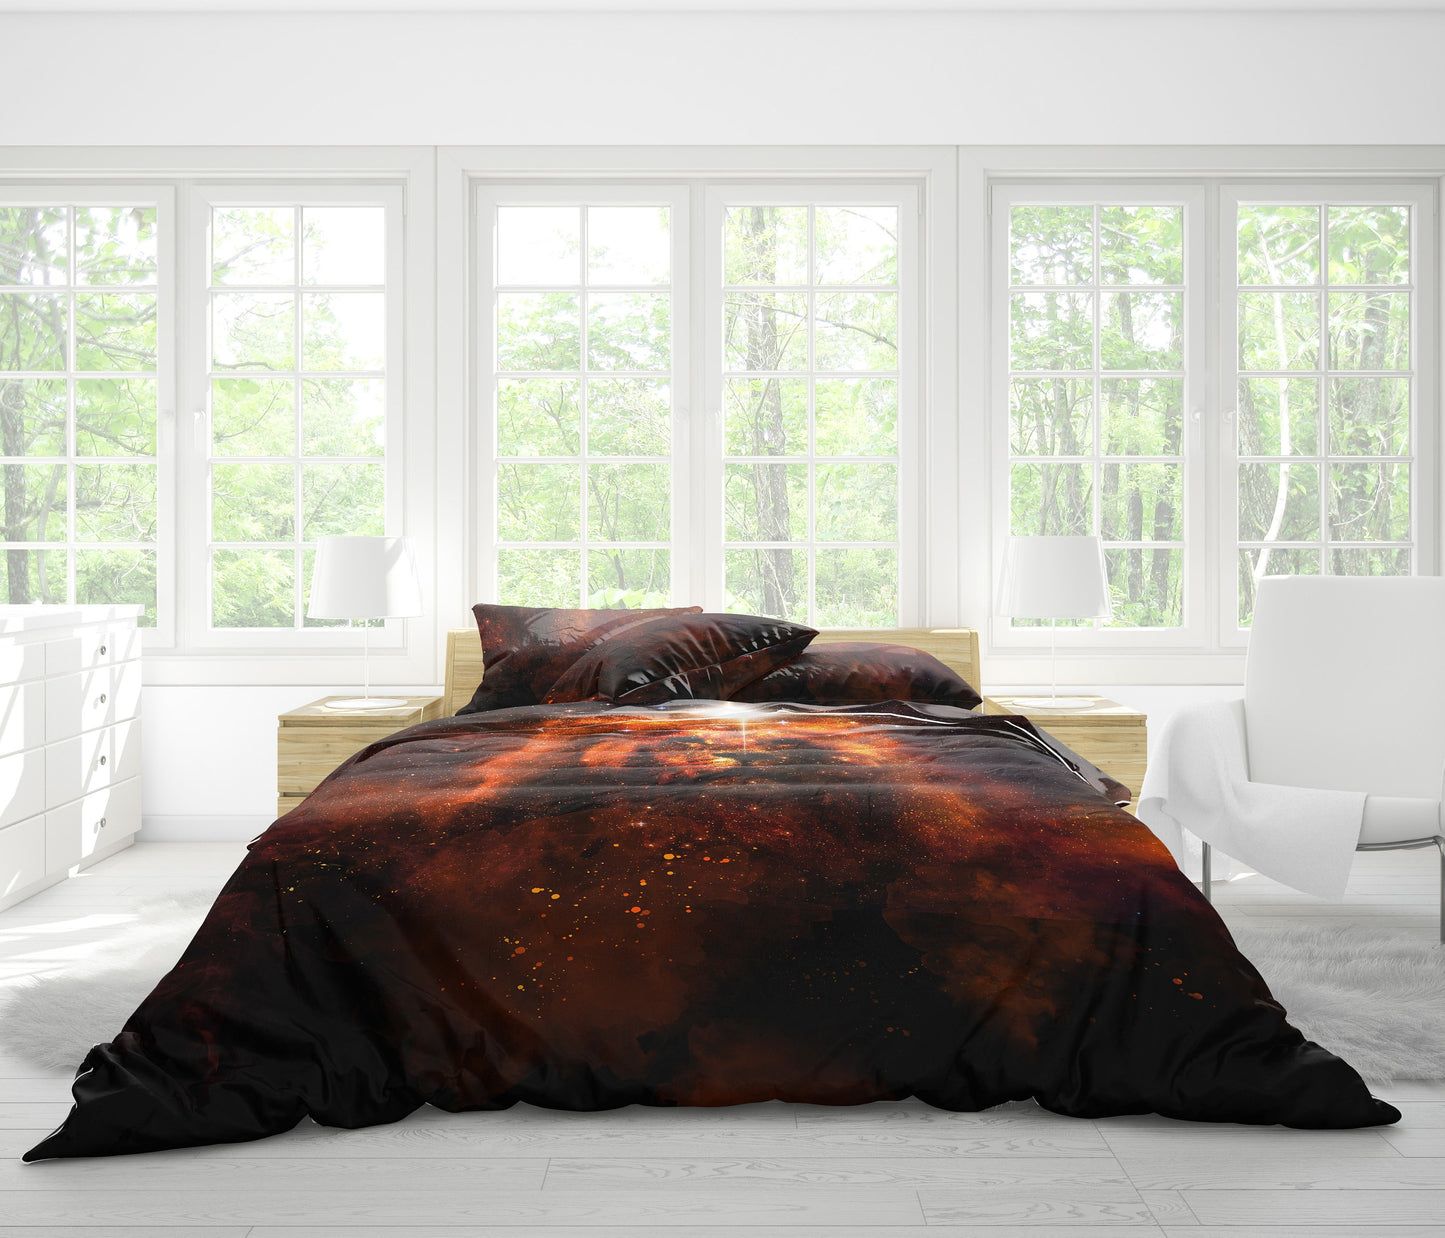 Rider in Fire skull 3 psc Bedding Set • 2 sided printed design • Personalized Bedding • Duvet Cover Set With Pillowcases • Queen King